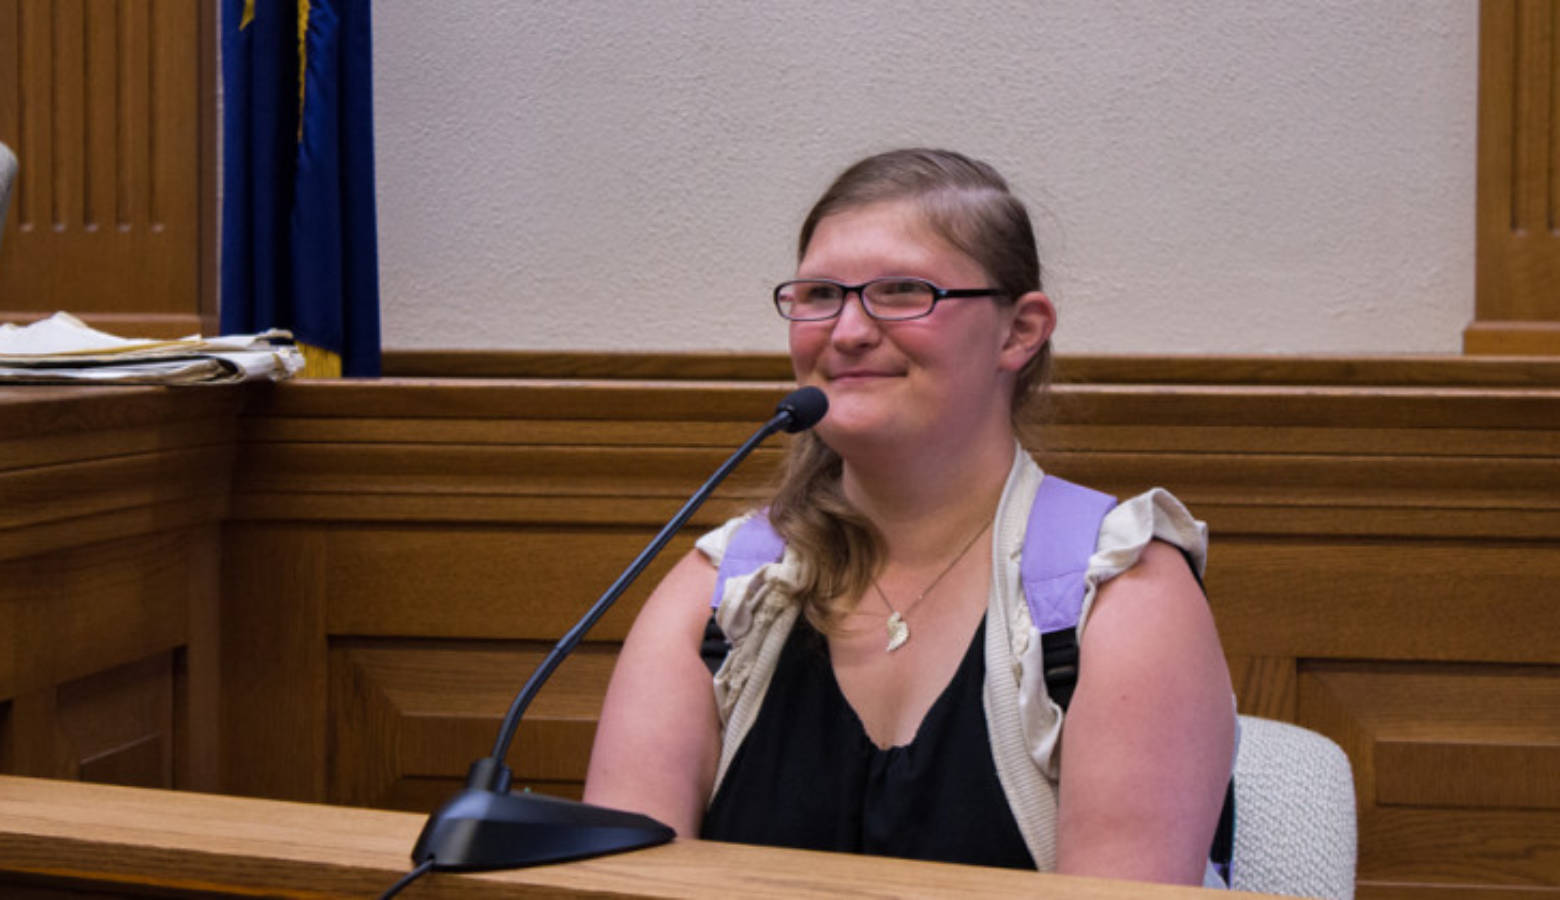 Jamie Beck has an intellectual disability, and was placed into a nursing home at age 19 after both her parents passed away. She's made dramatic progress in the years since.